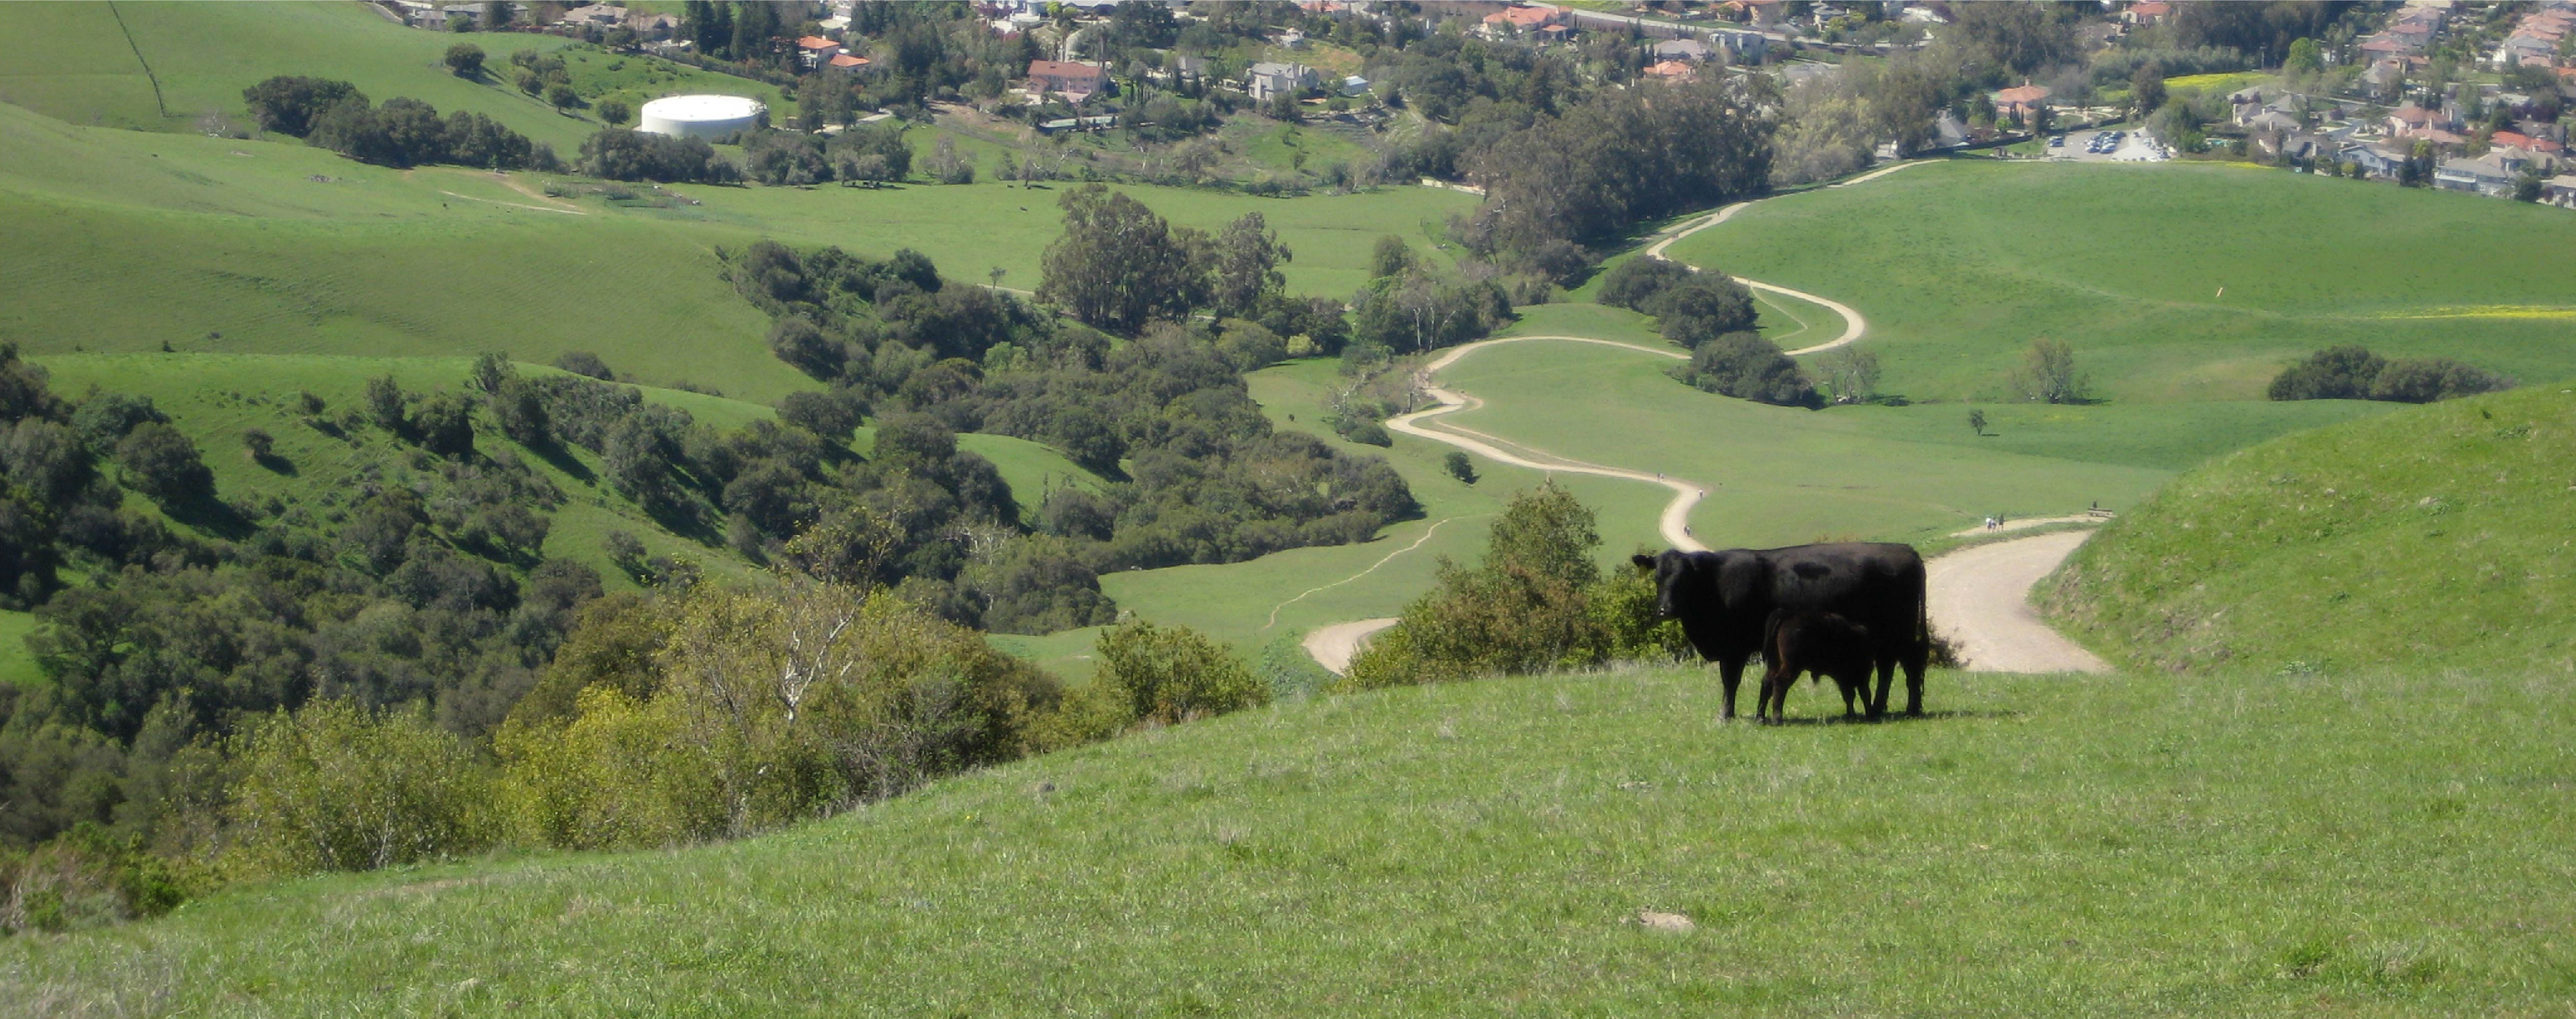 Cows on green grass covering Mission Peak